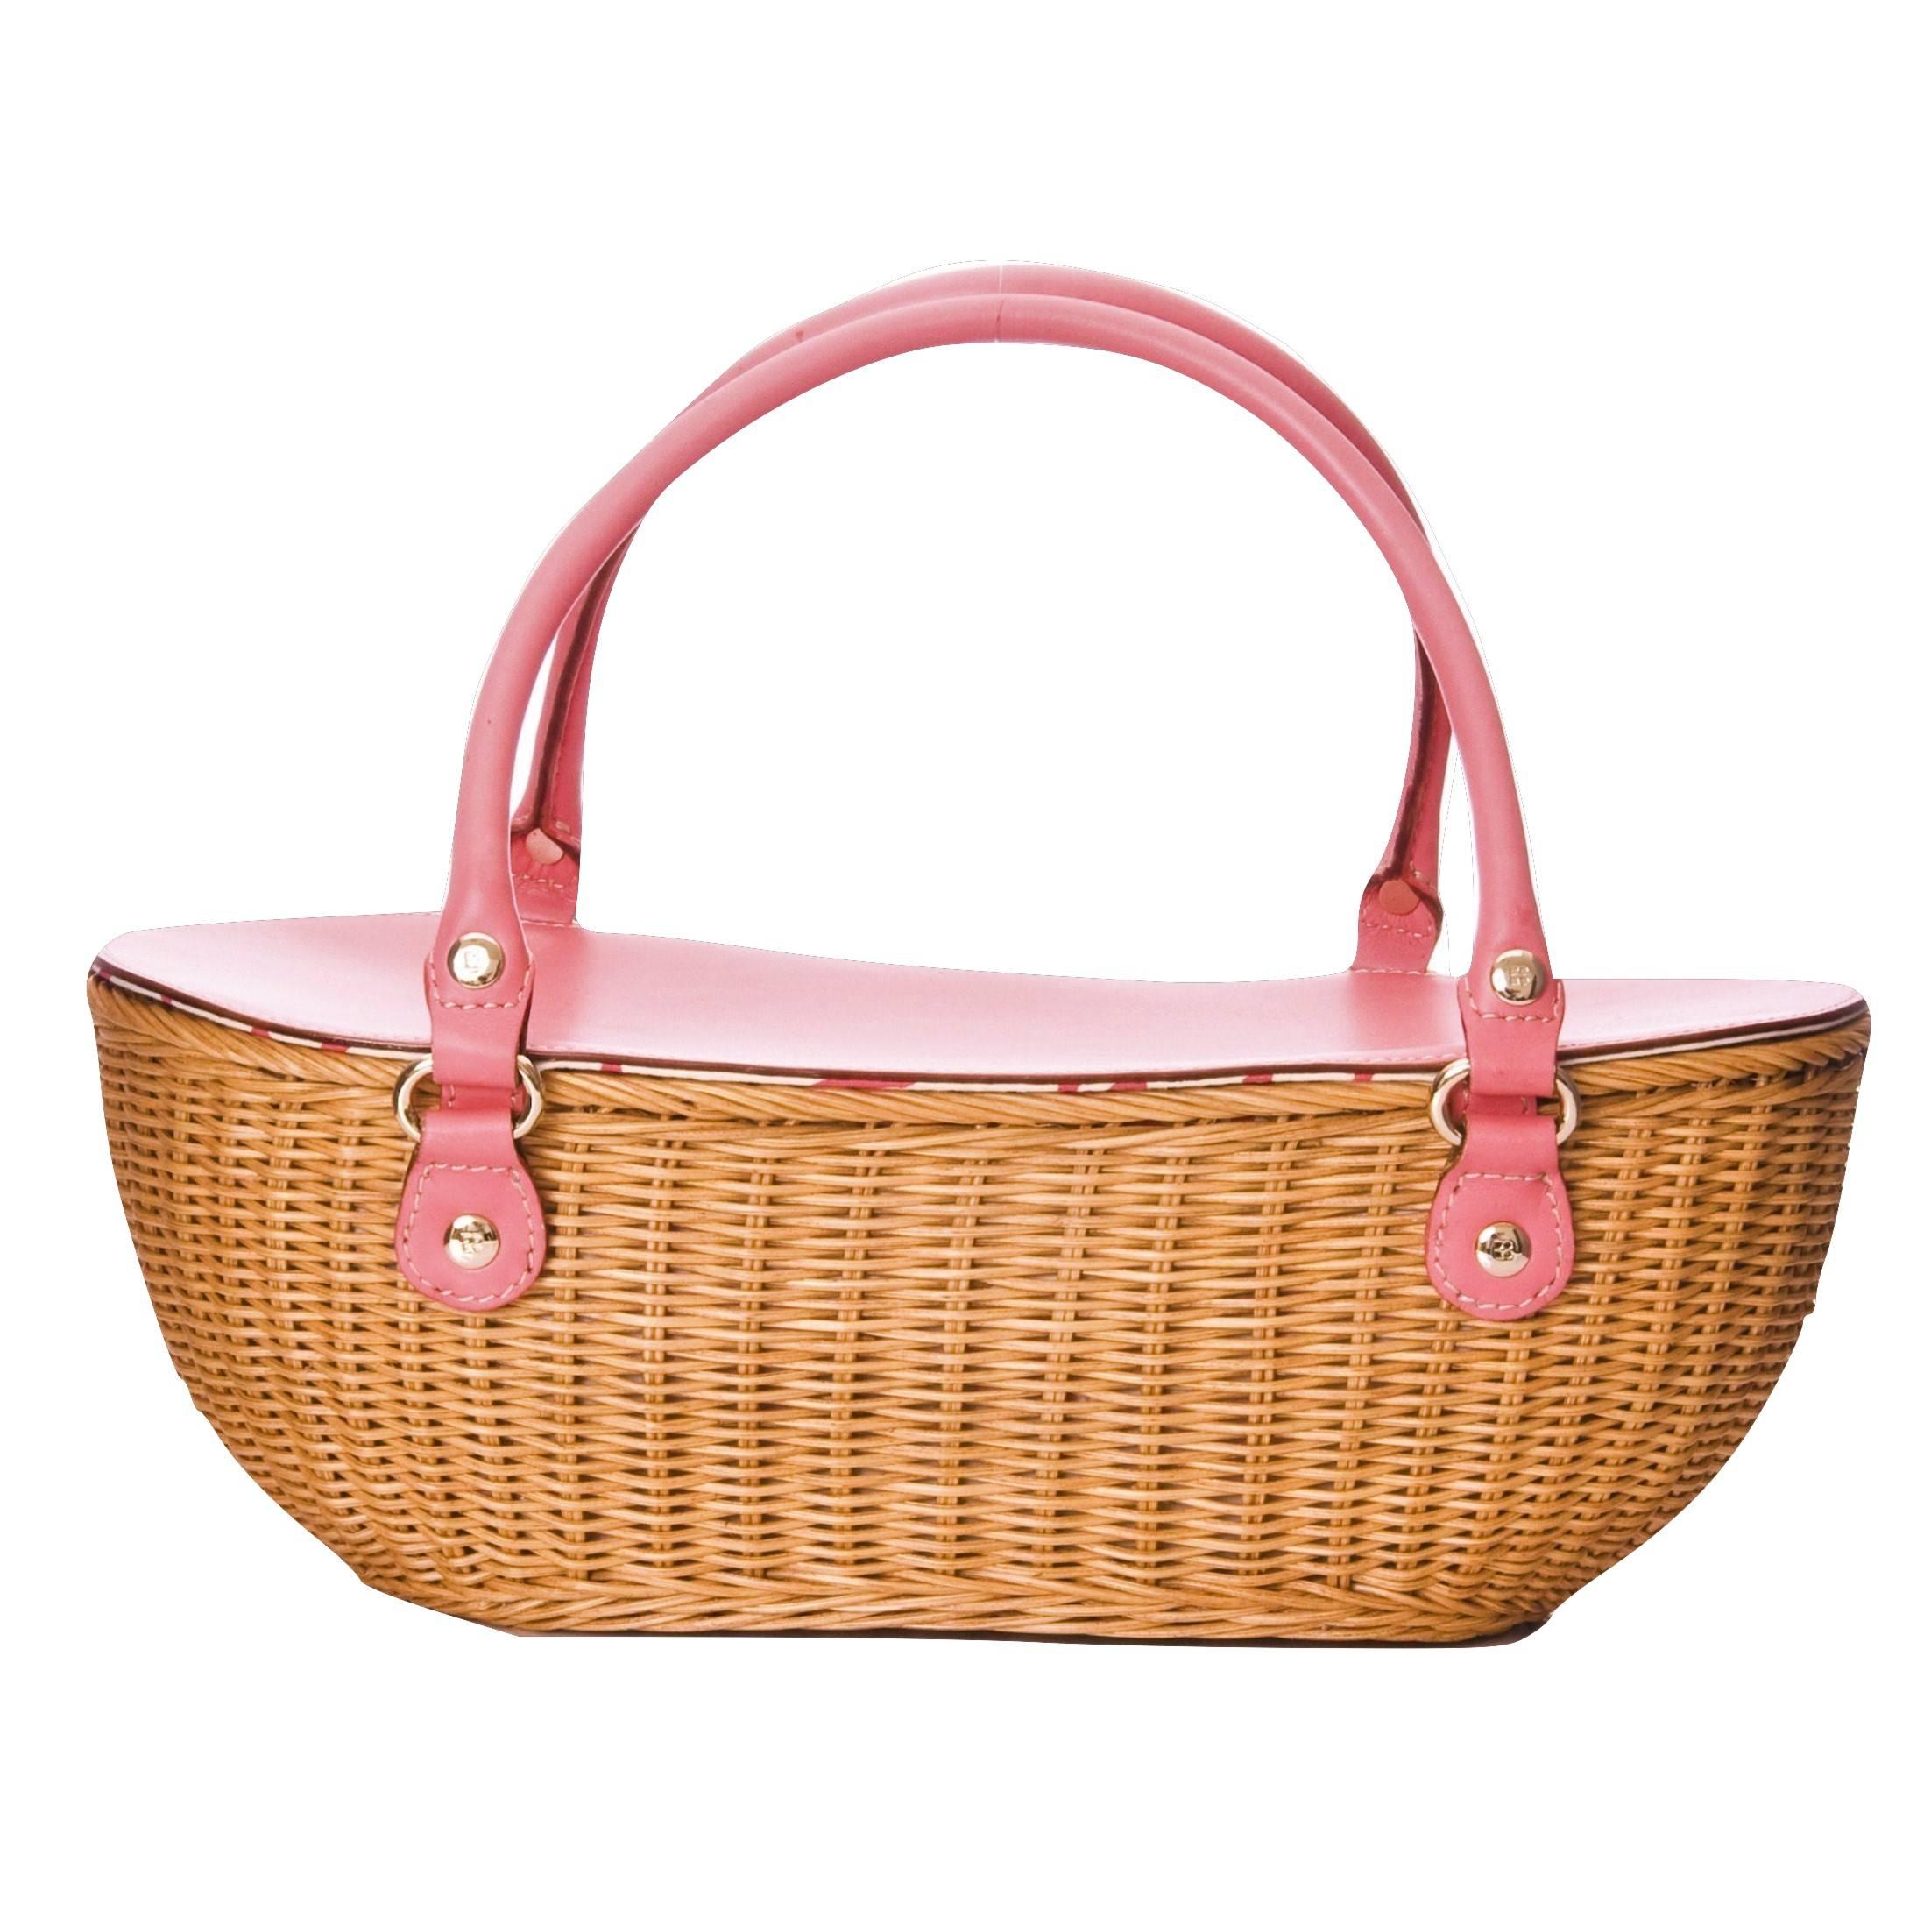 New Kate Spade Her Rare Spring 2005 Final Collection Pink Wicker Basket Bag 3